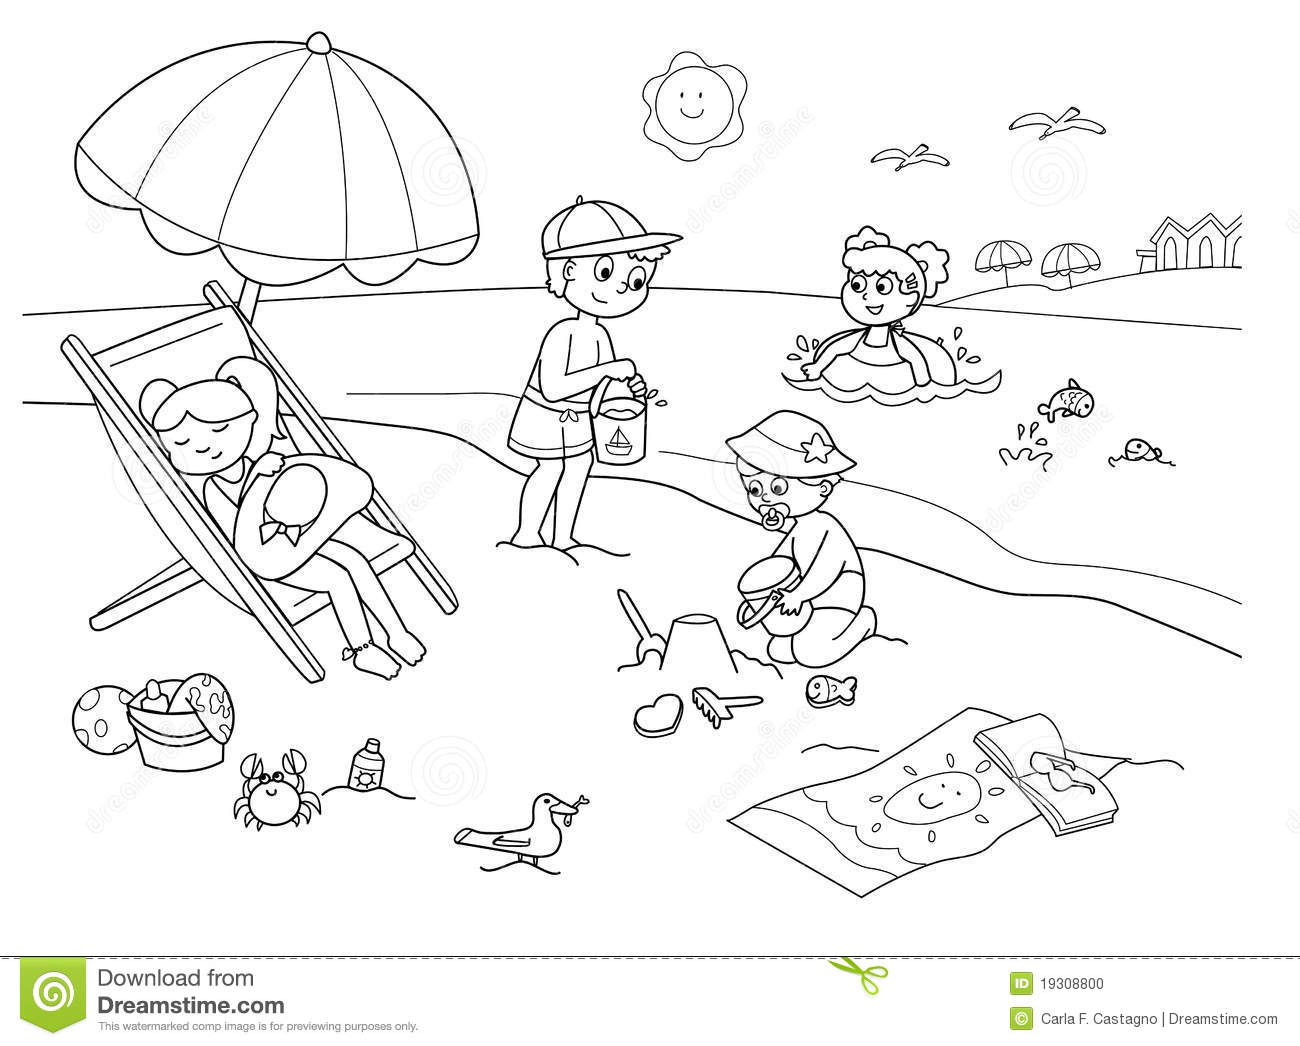 Beach clipart black and white. Station 